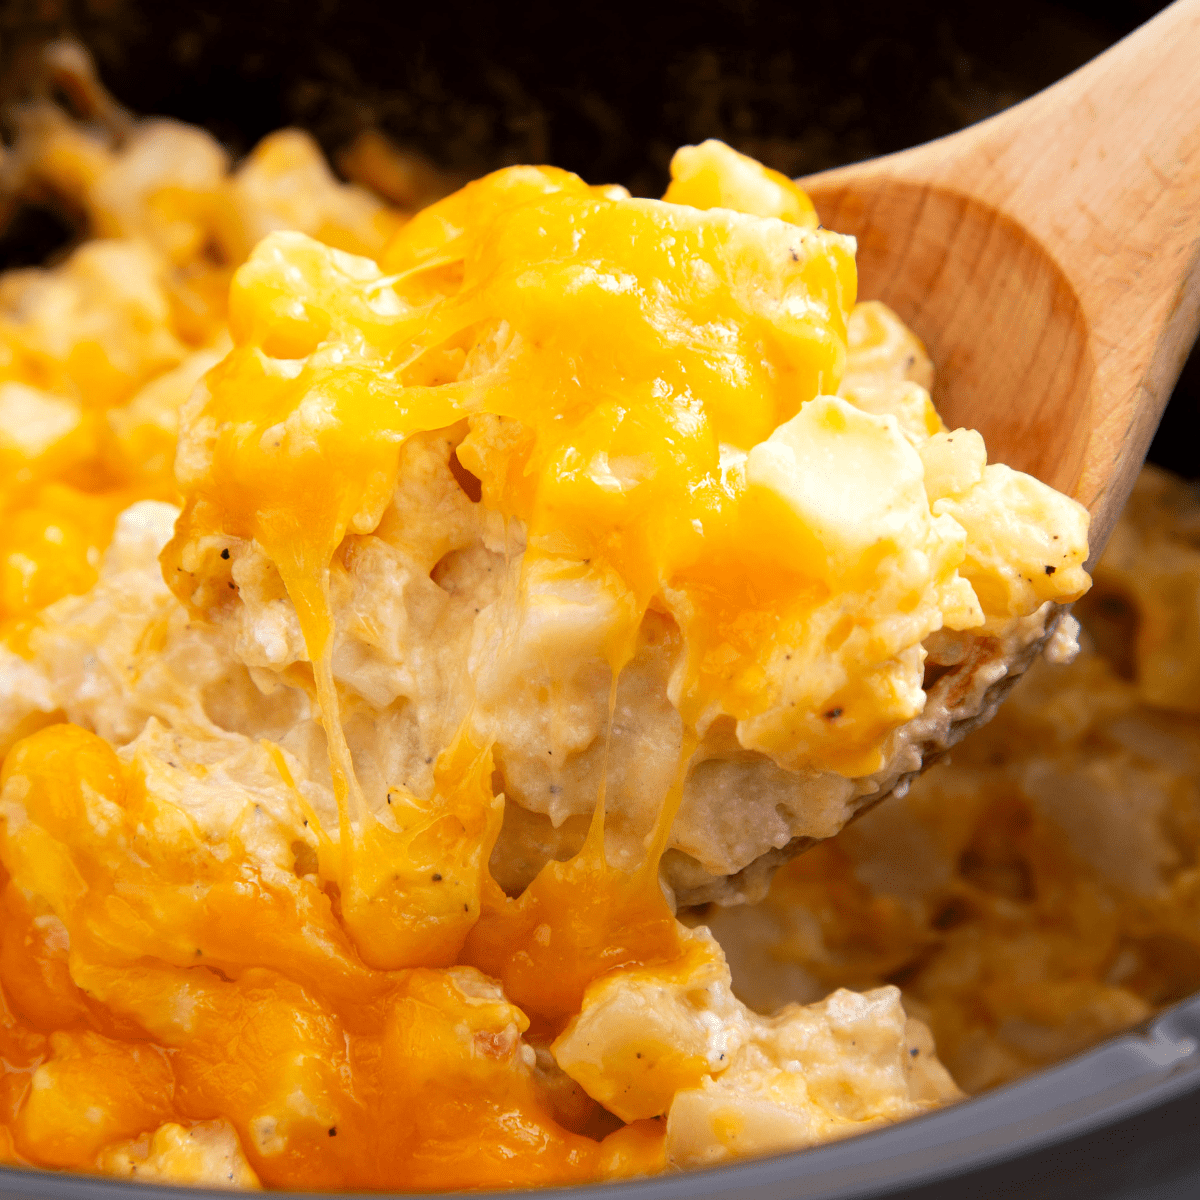 https://www.allthingsmamma.com/wp-content/uploads/2023/03/Crockpot-Cheesy-Potatoes-Featured-Image.png